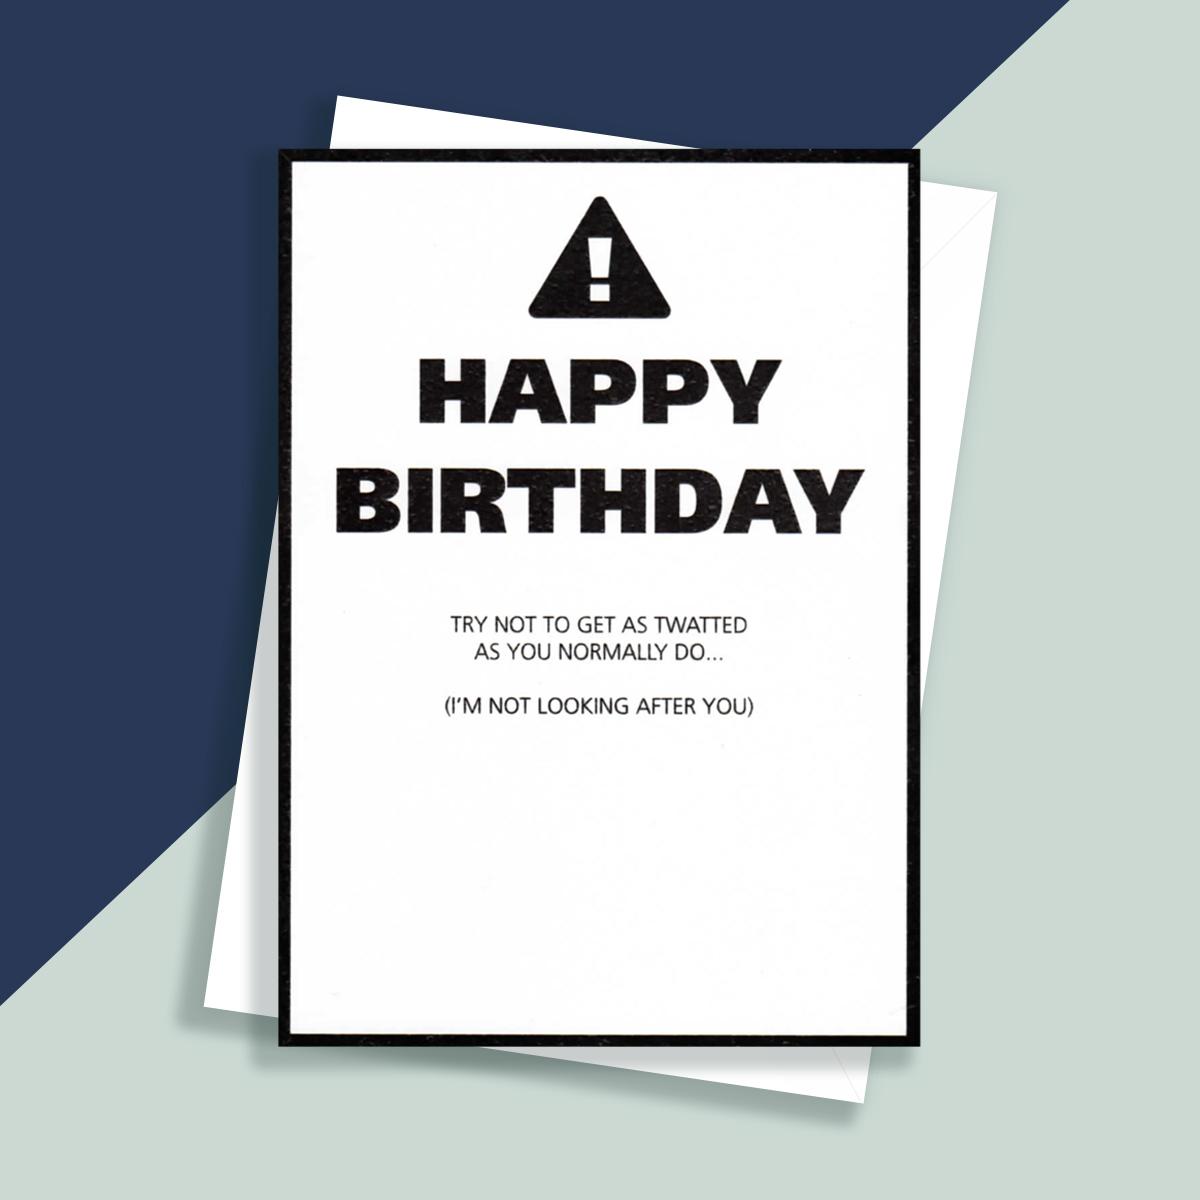 Try Not To Get Twatted Rude Birthday Card Sitting On A Display Shelf